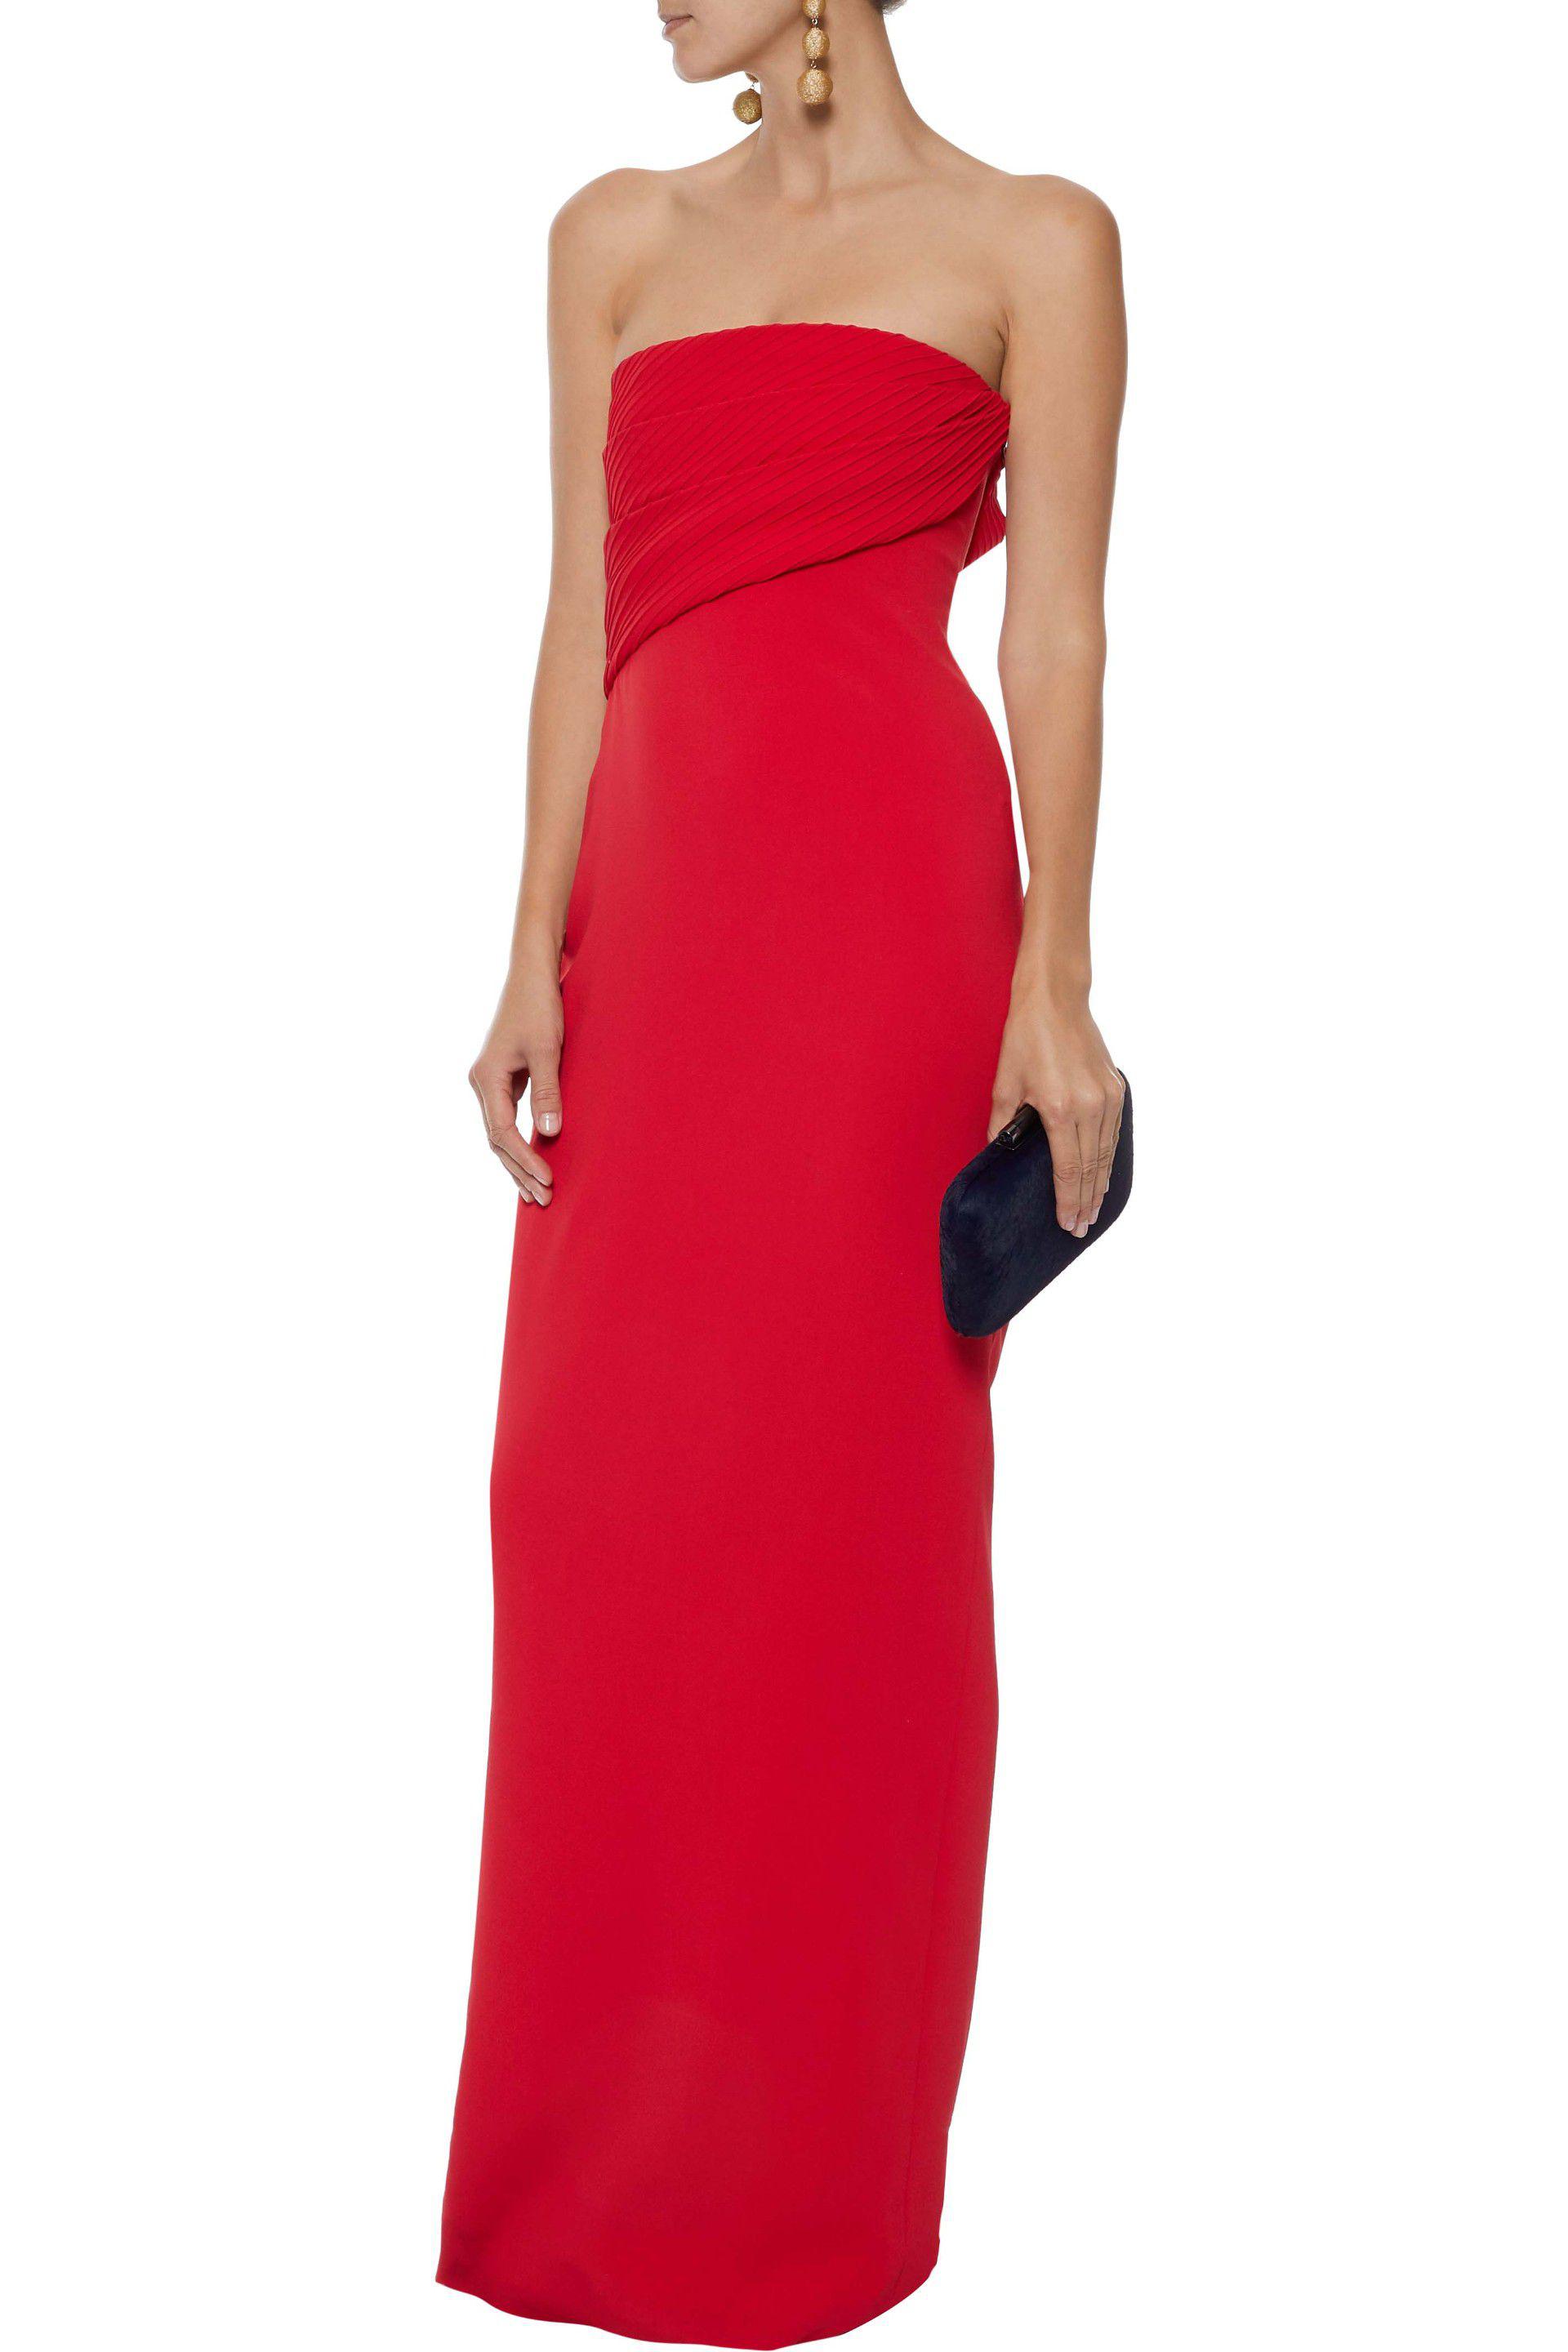 Brandon Maxwell Strapless Layered Crepe Gown - Lyst